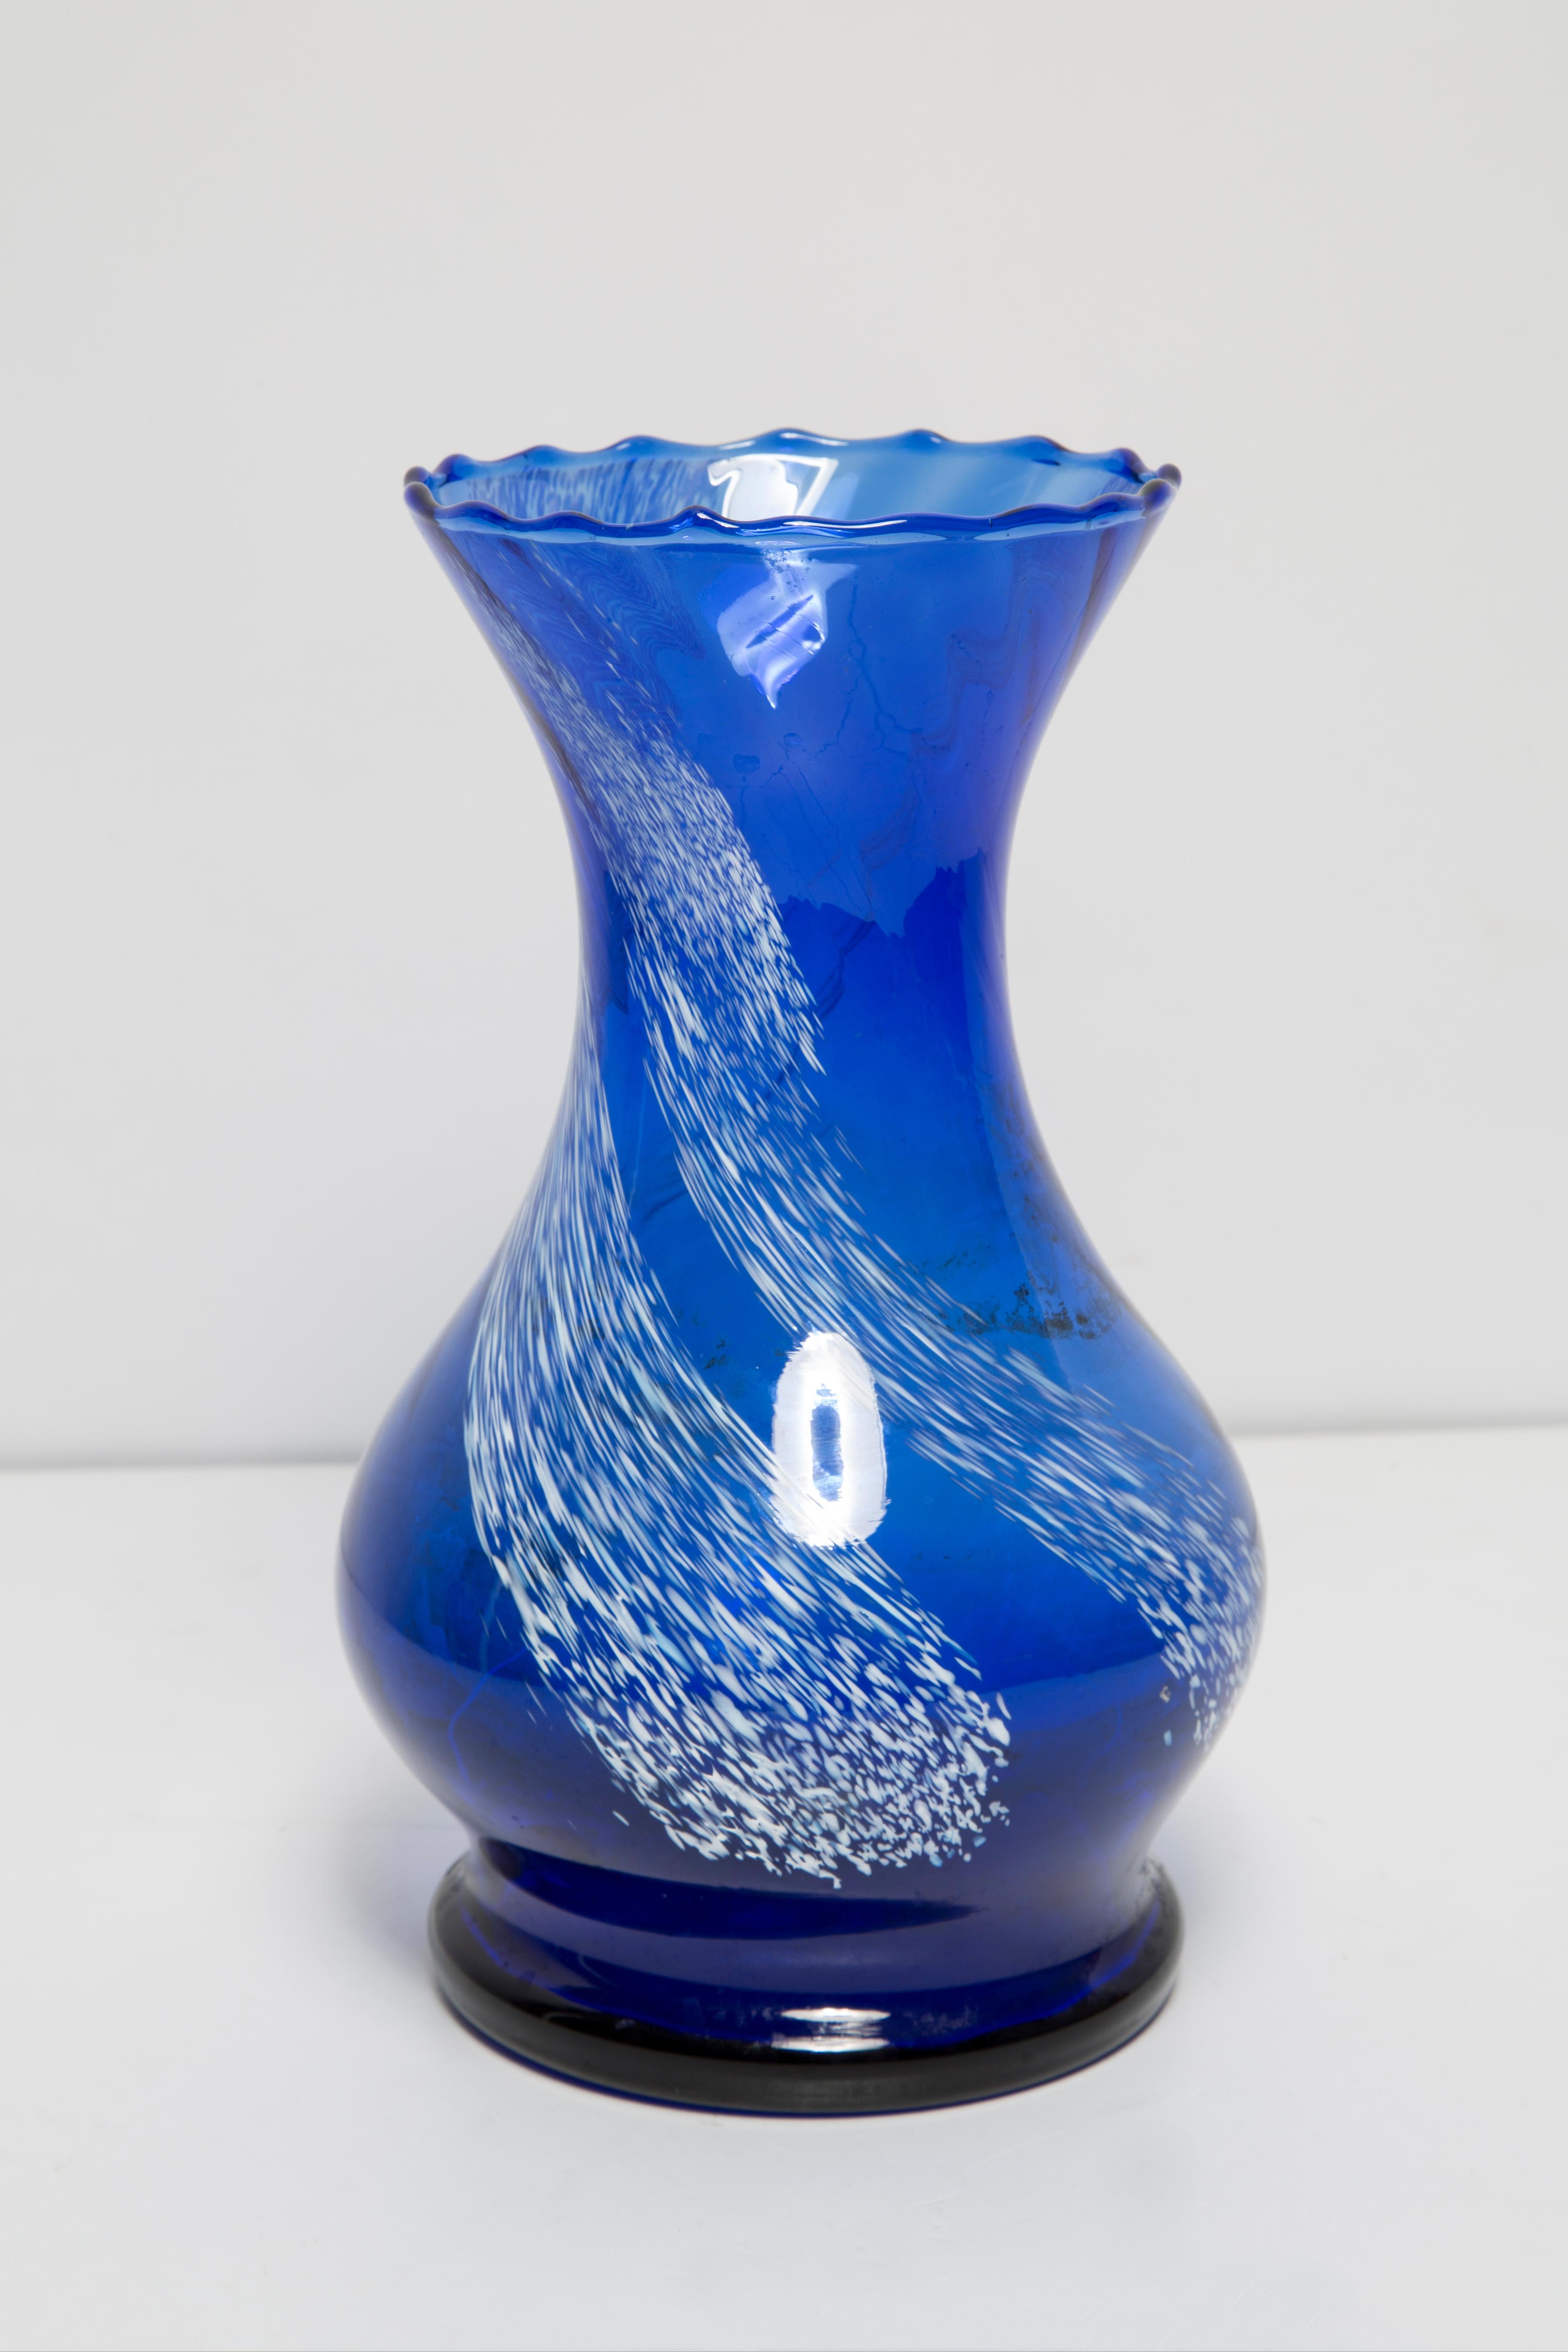 20th Century Mid Century Vintage Blue and White Artistic Glass Vase, Europe, 1970s For Sale